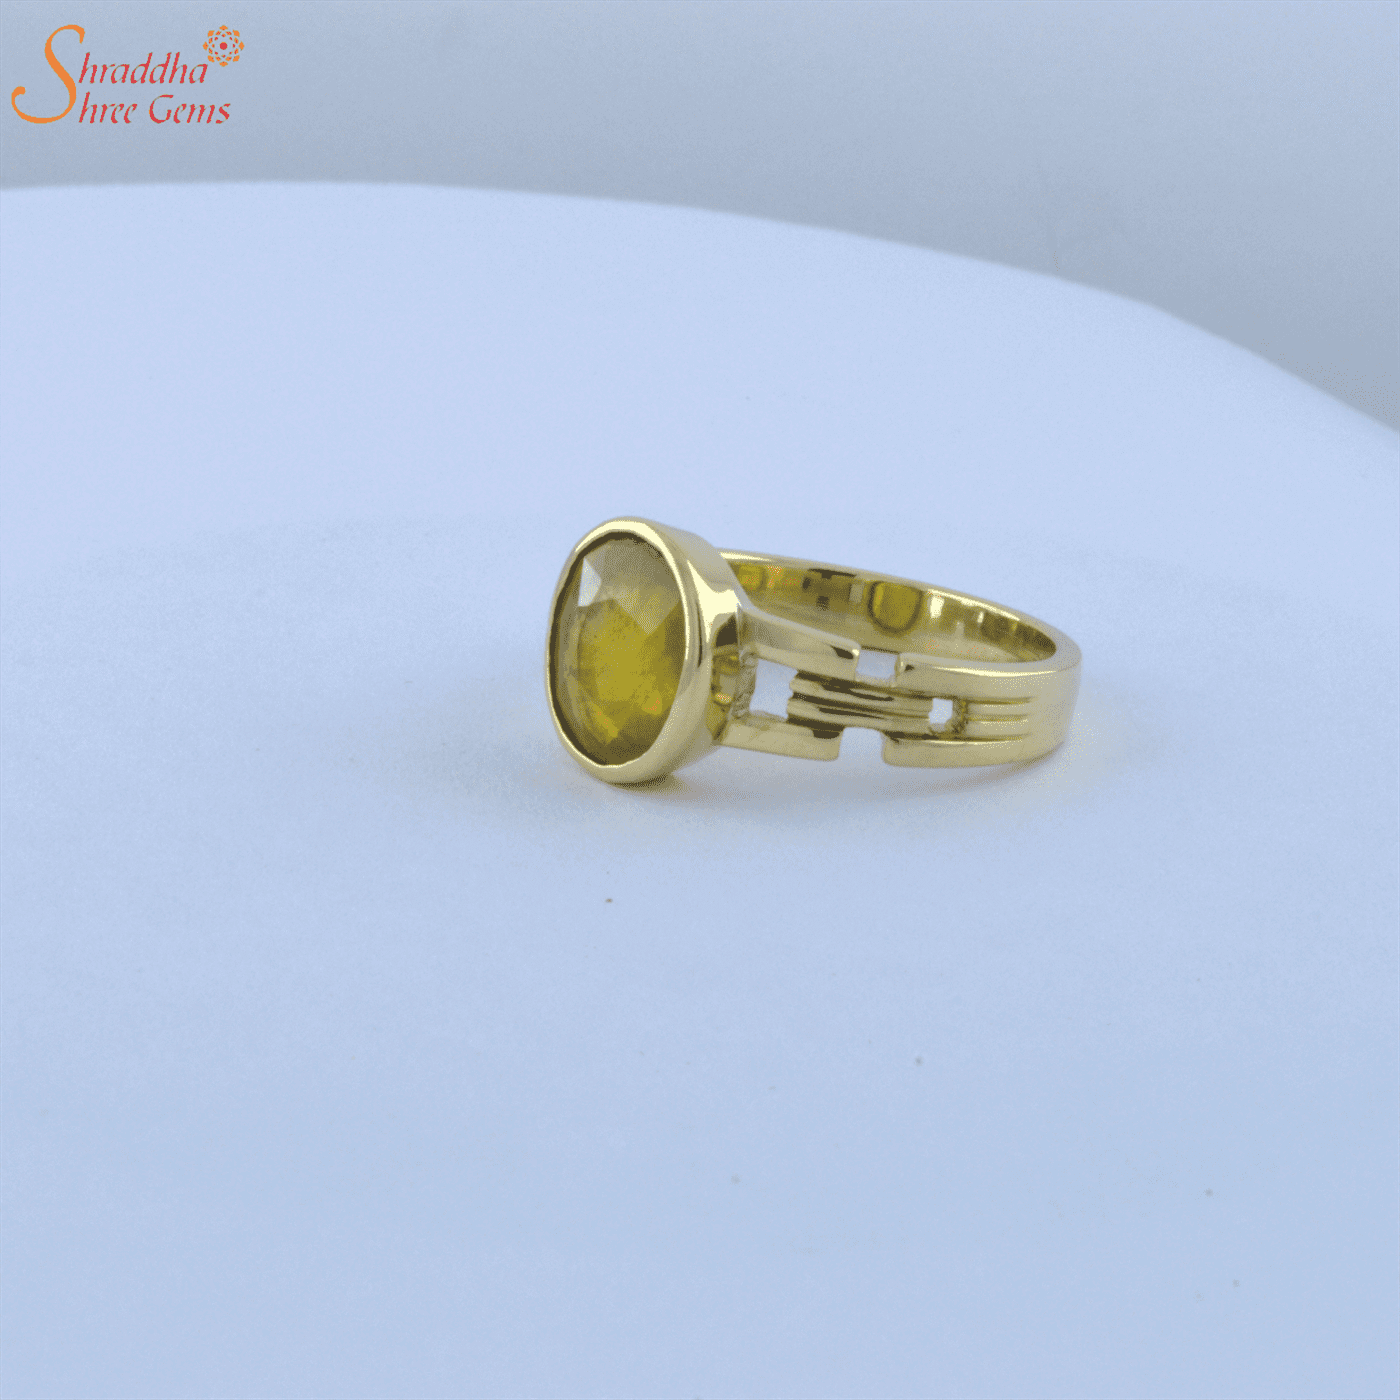 Amazon.com: Natural Certified Yellow Sapphire/ Pukhraj Stone AAA Quality  92.5 Silver Rashi Ratan Astrological Purpose Beautiful Ring For Men & Women  By KEVAT GEMS. (4.25US4.50US, 11.00): Clothing, Shoes & Jewelry